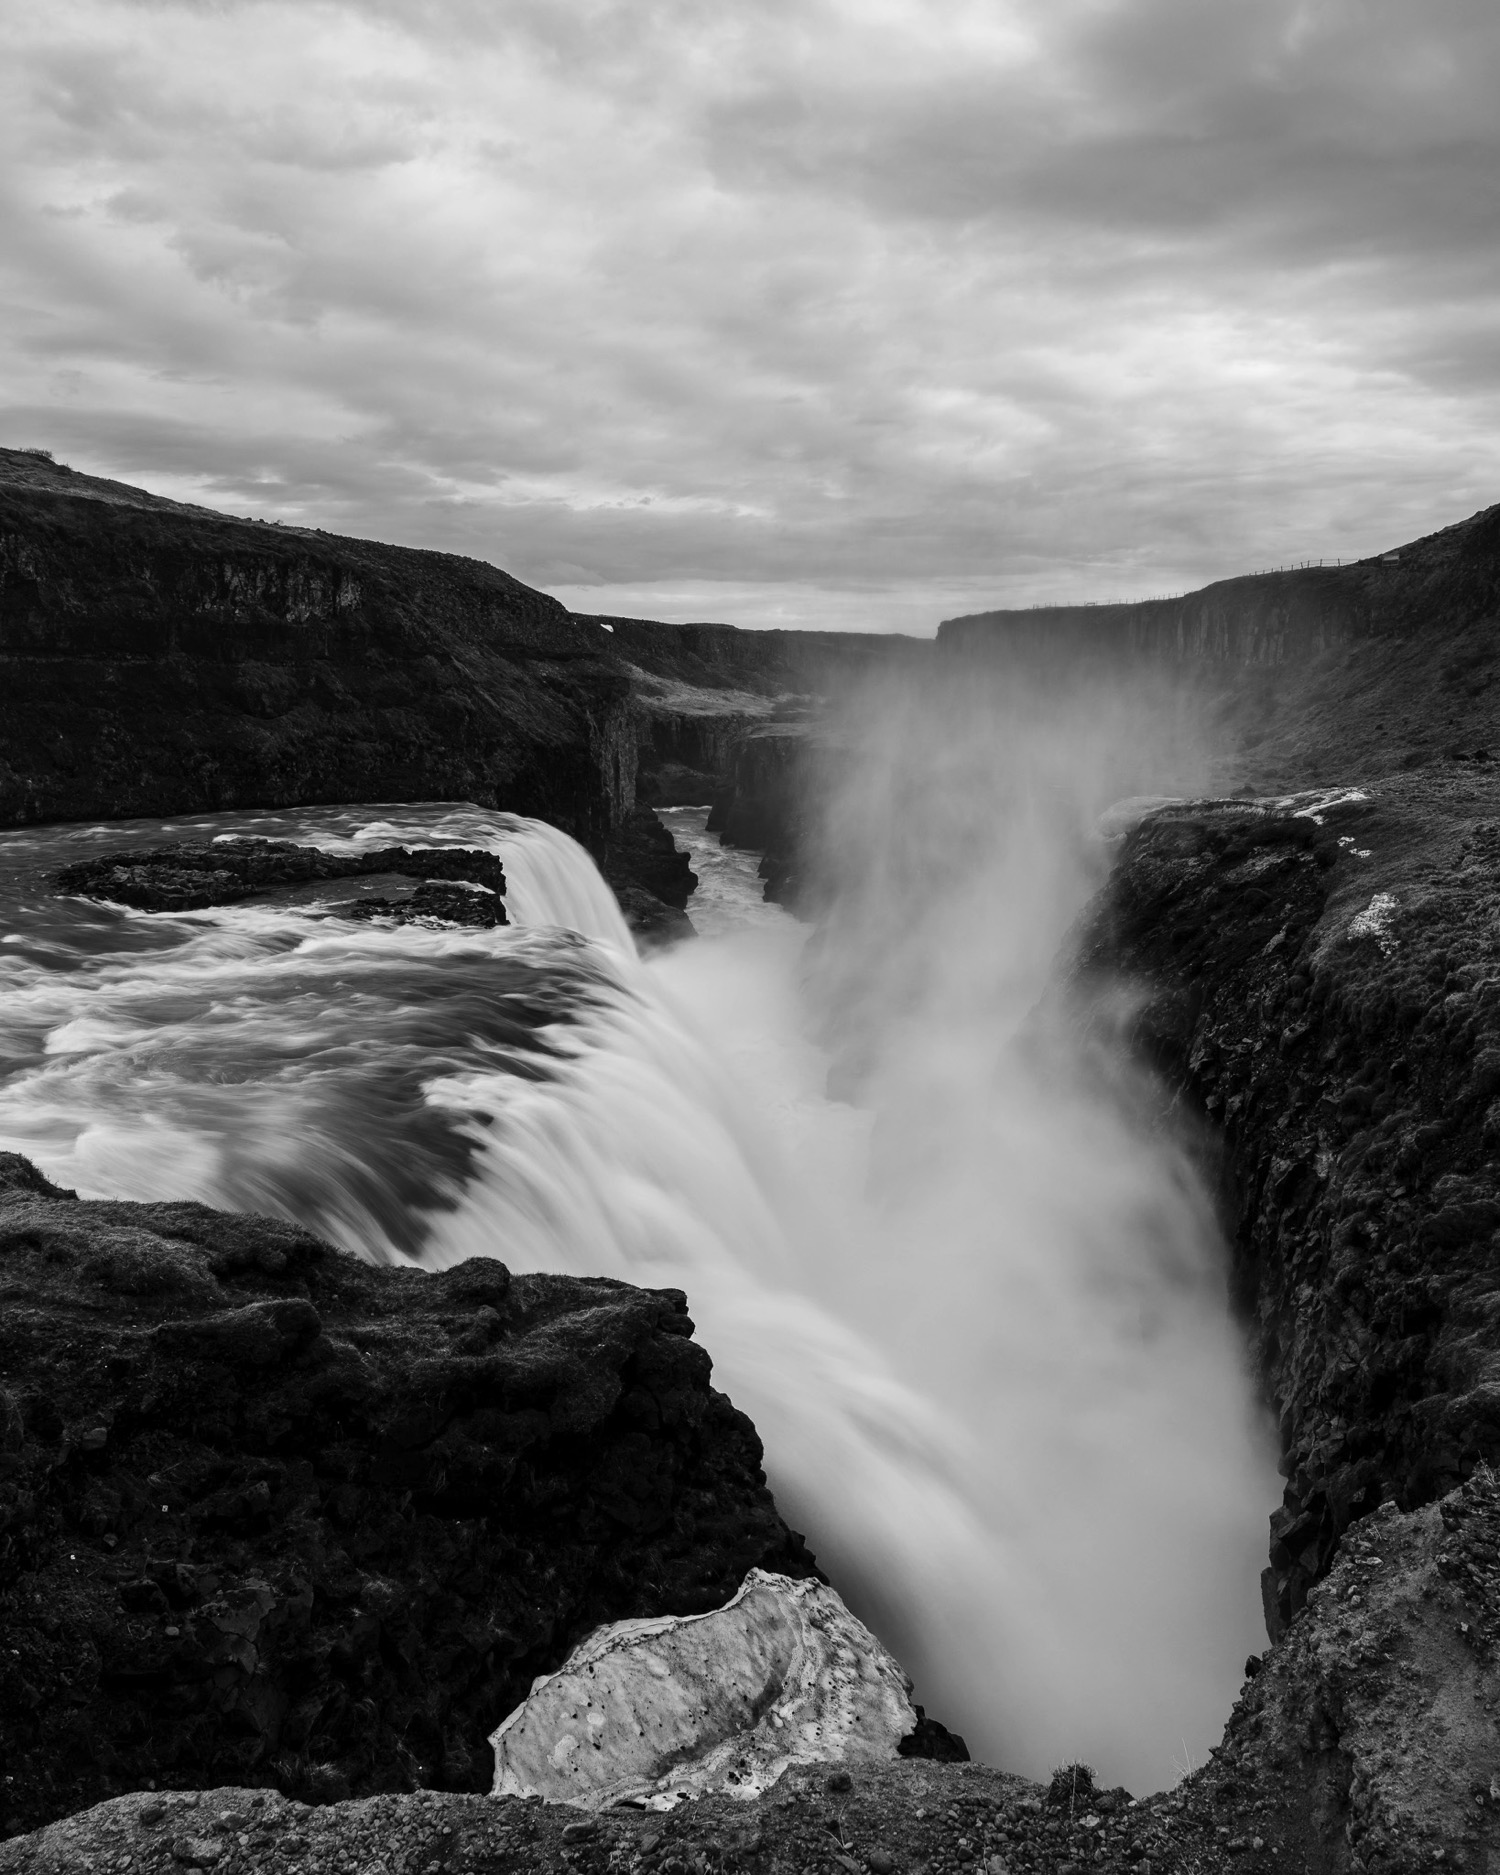  Gullfoss - Iceland Blog Part II

Photo by Trung Hoang Photography |www.trunghoangphotography.com | San Francisco Bay Area Wedding Photographer 